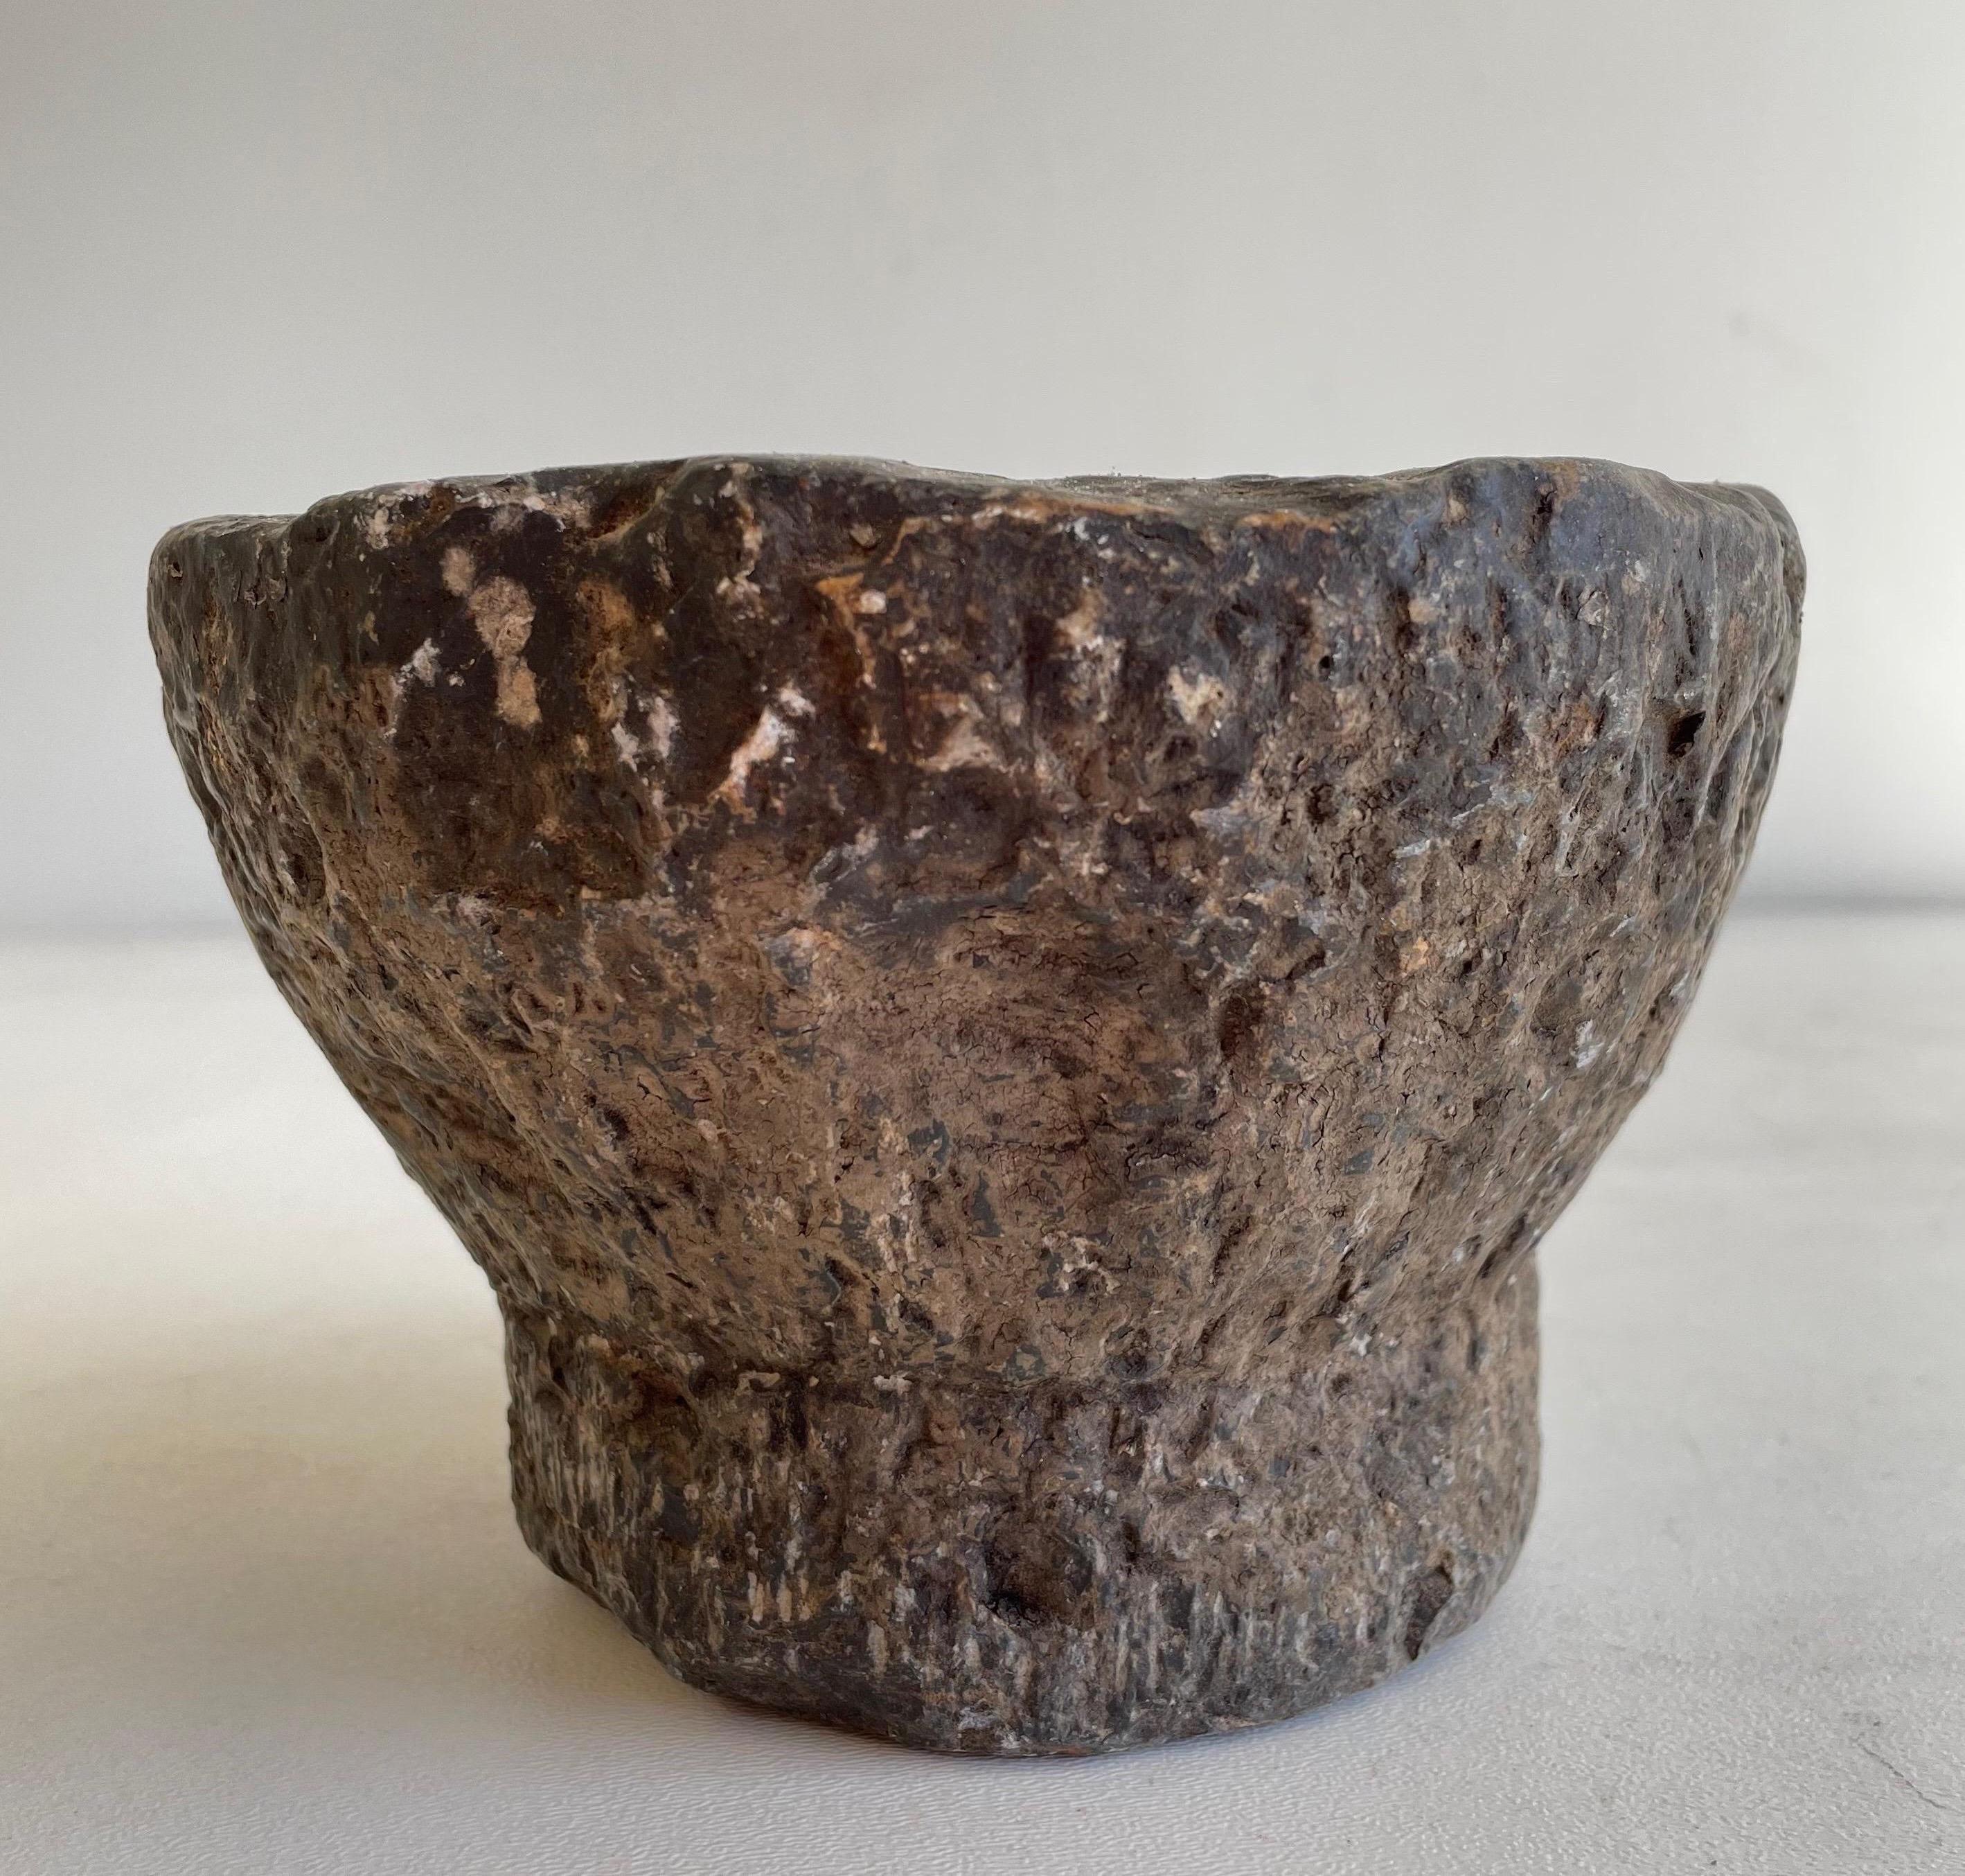 Antique stone mortar bowl, great decorative item, or can be used. Accessories not included 
Size:6 1/4” D x 4” H.